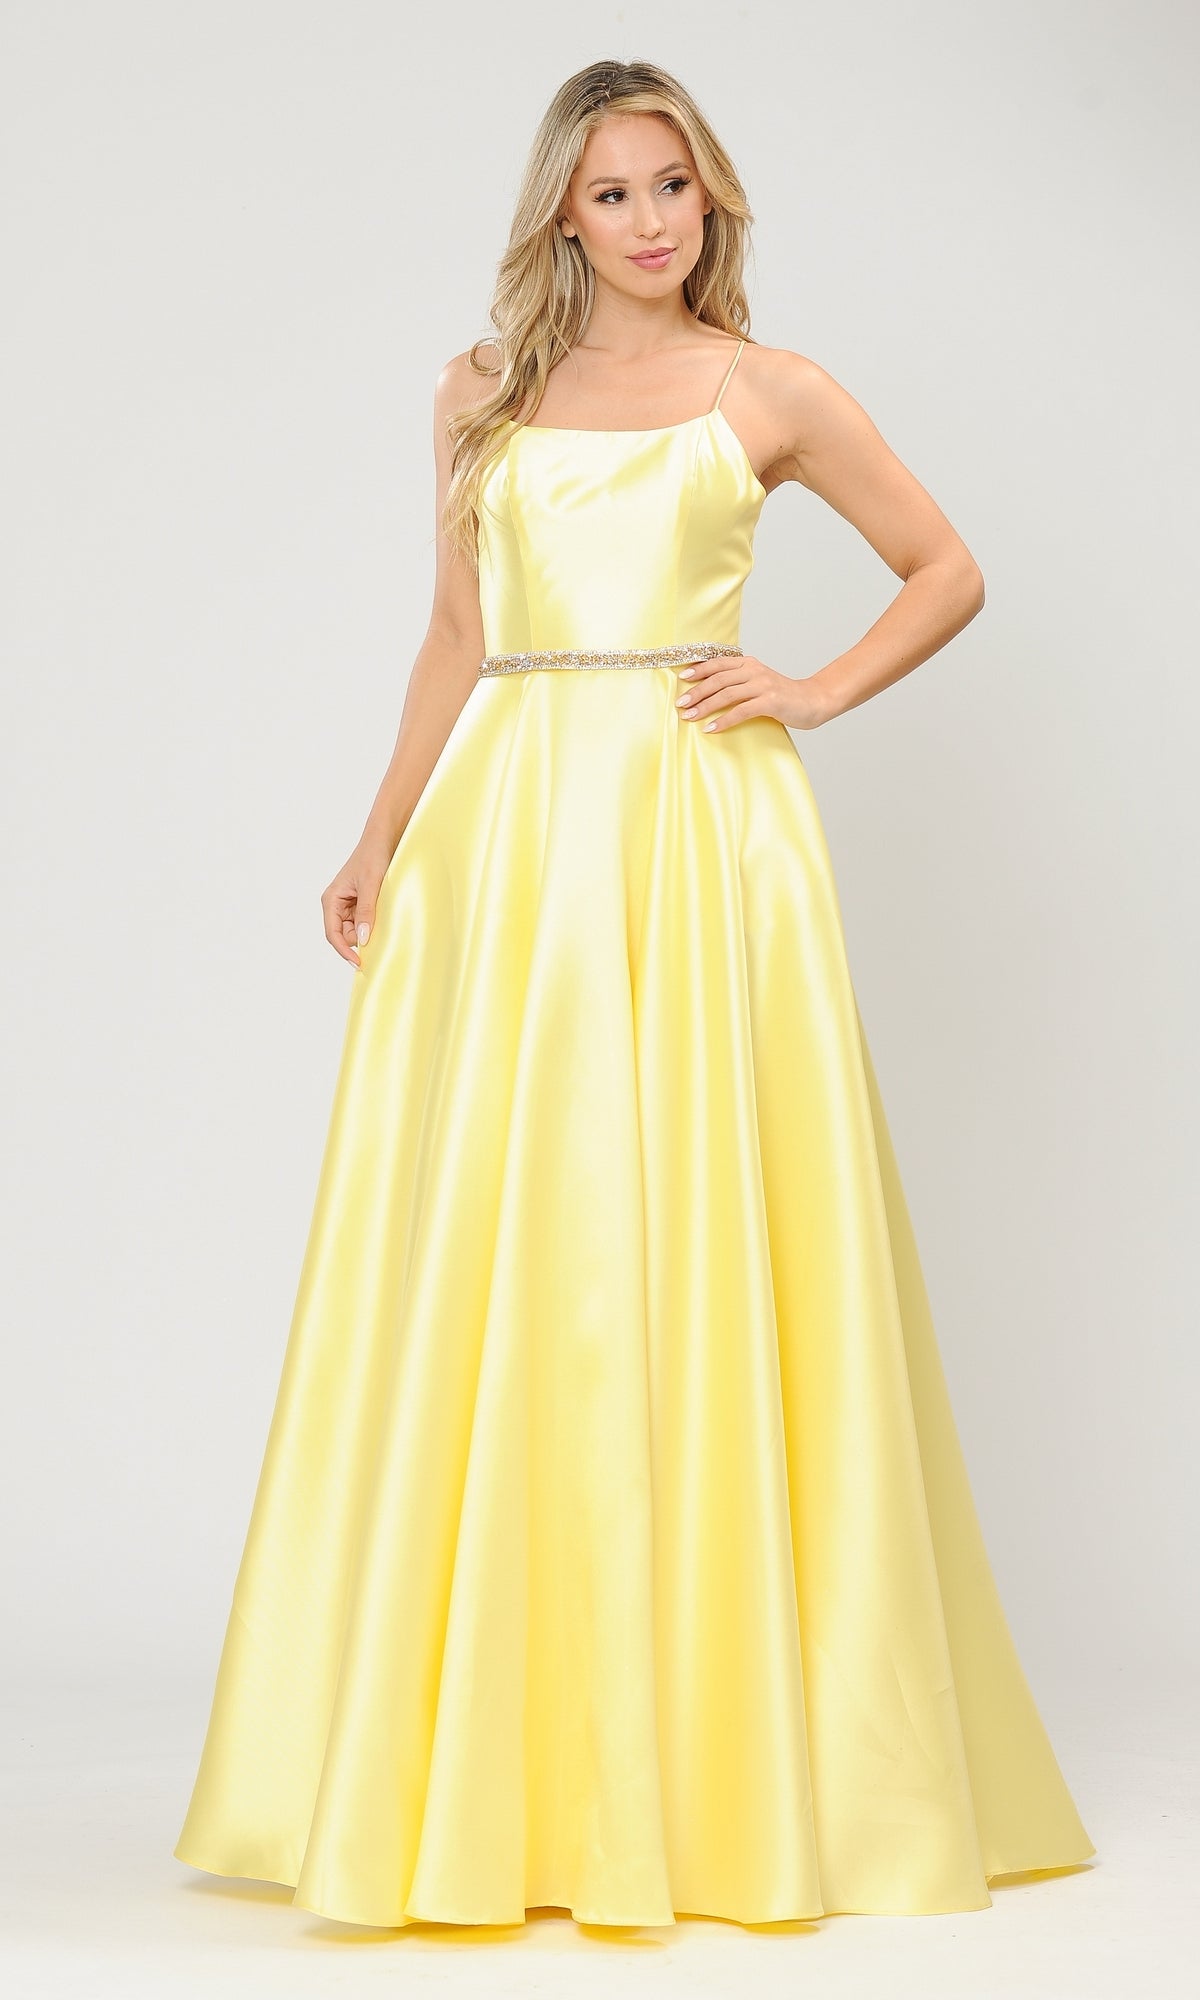 Scoop-Neck Long A-Line Prom Dress with Pockets 8684